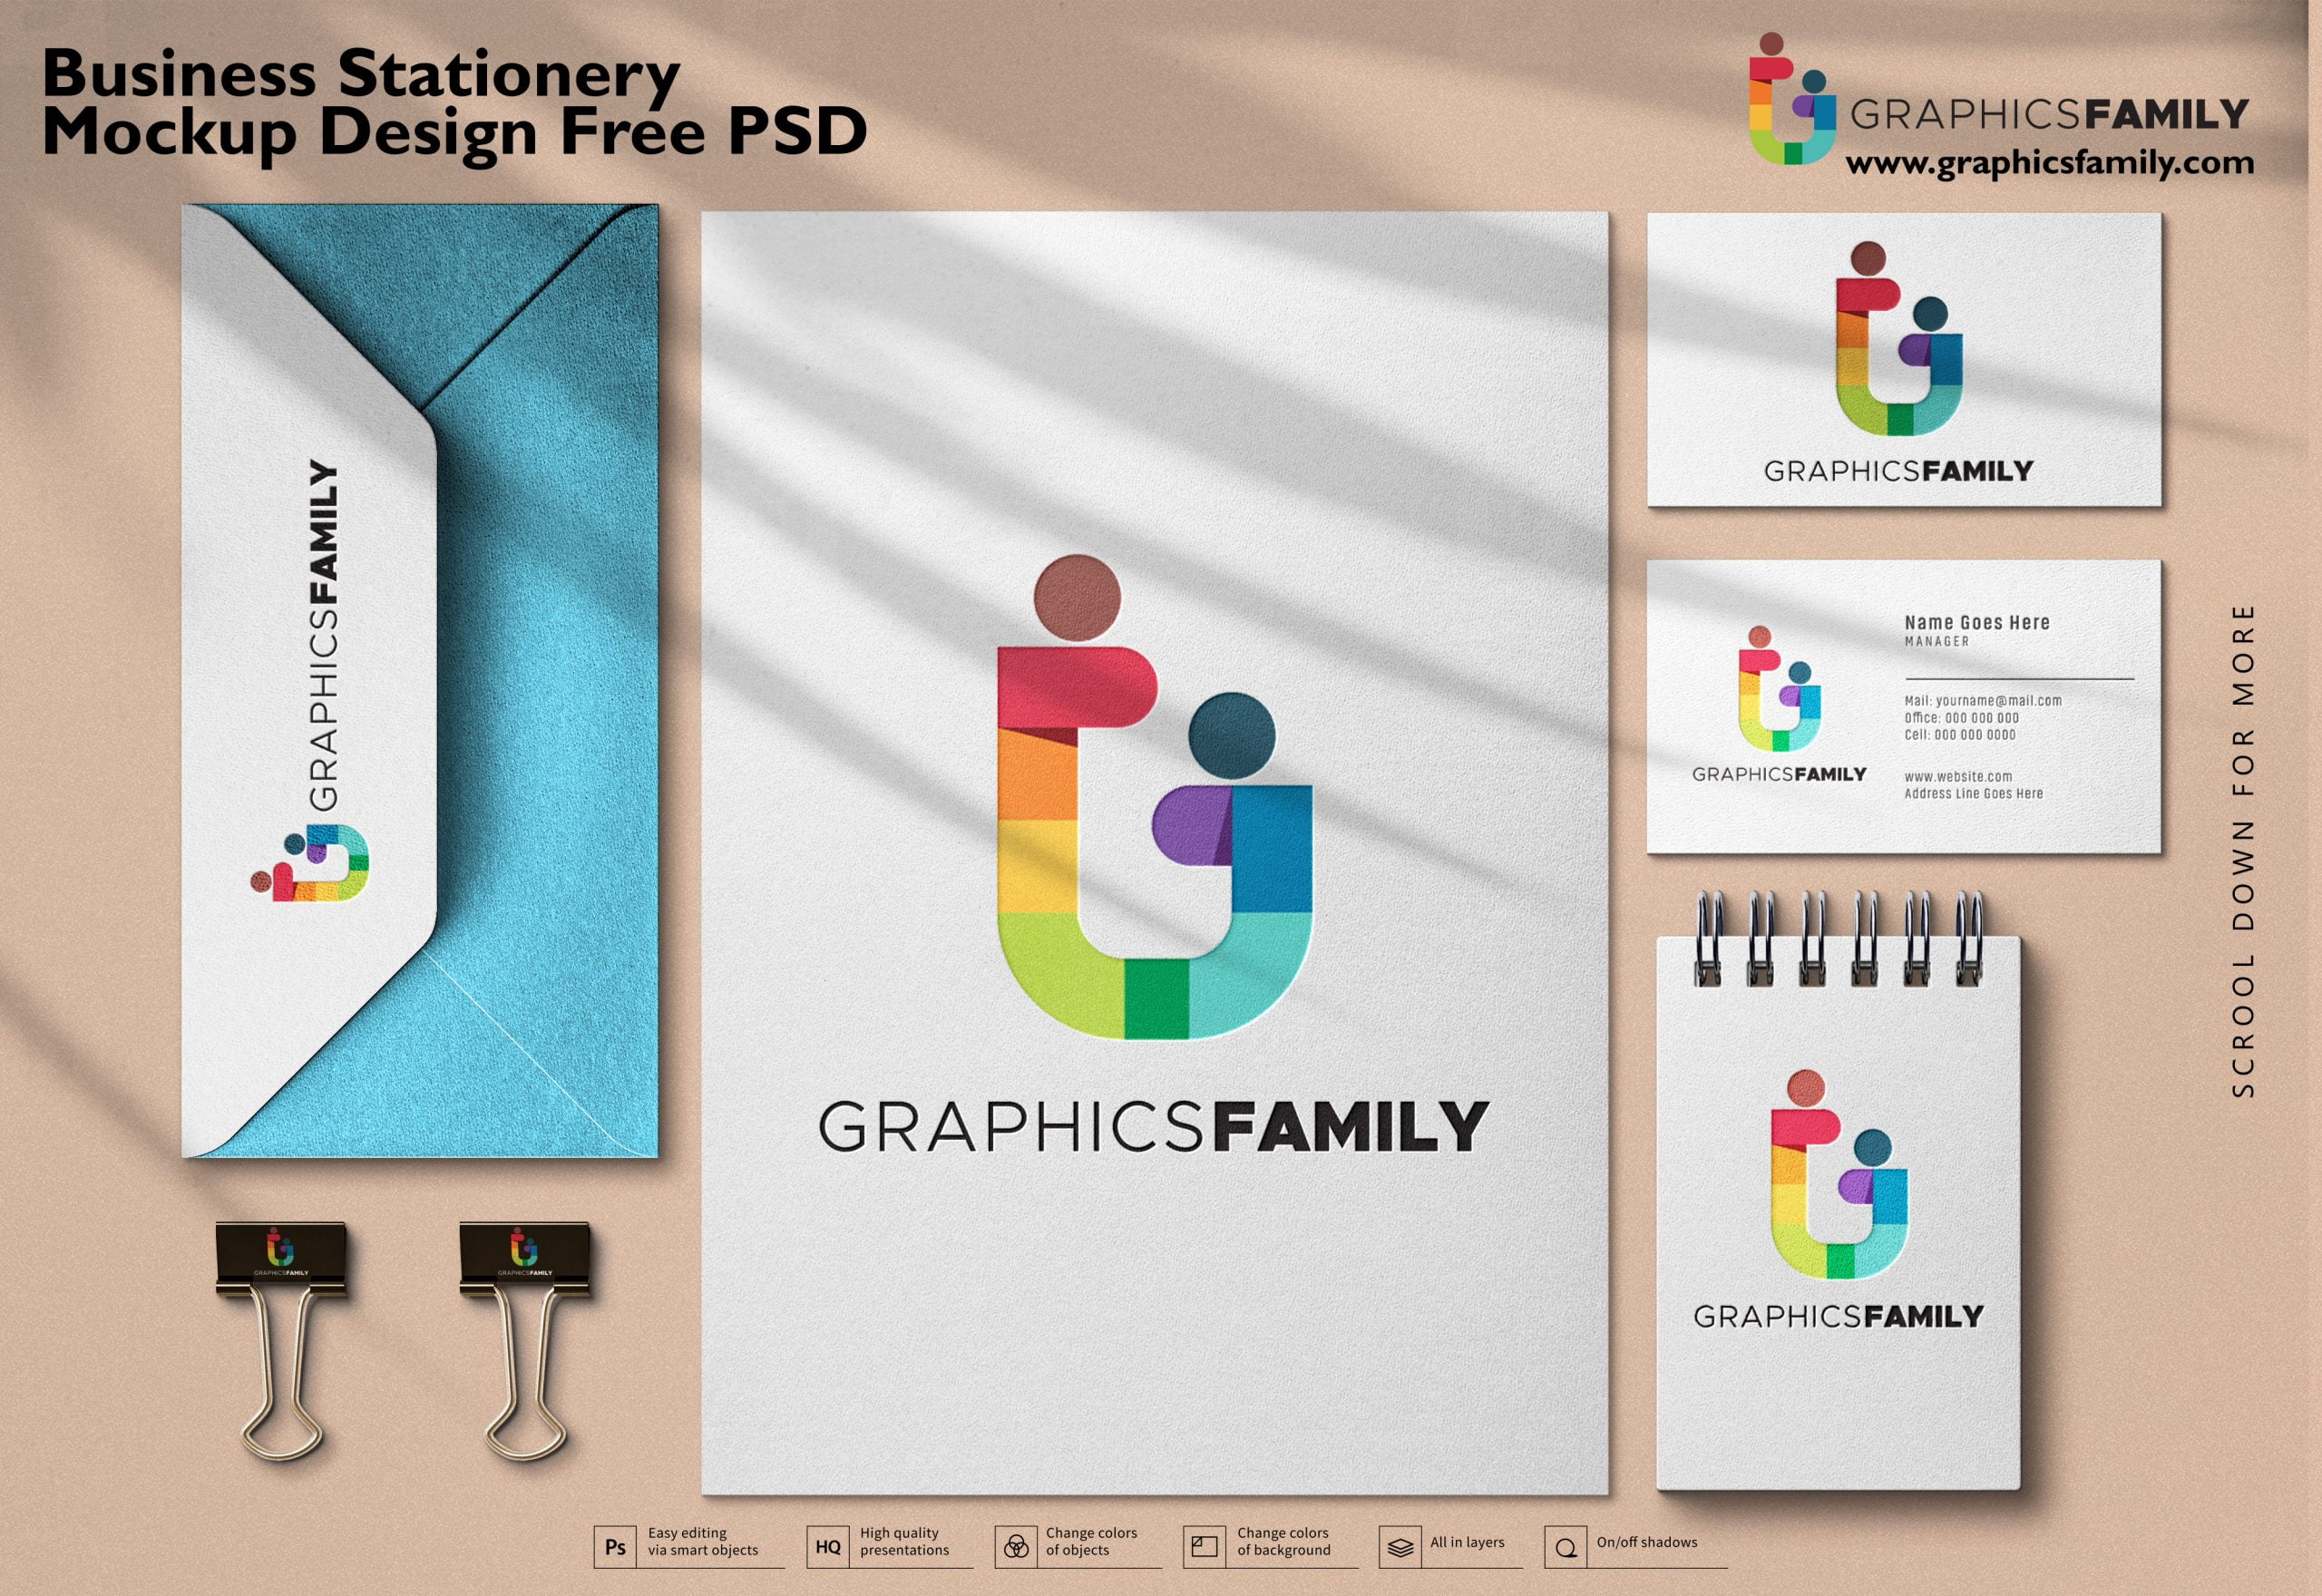 Download Business Stationery Mock Up Design Free Psd Graphicsfamily